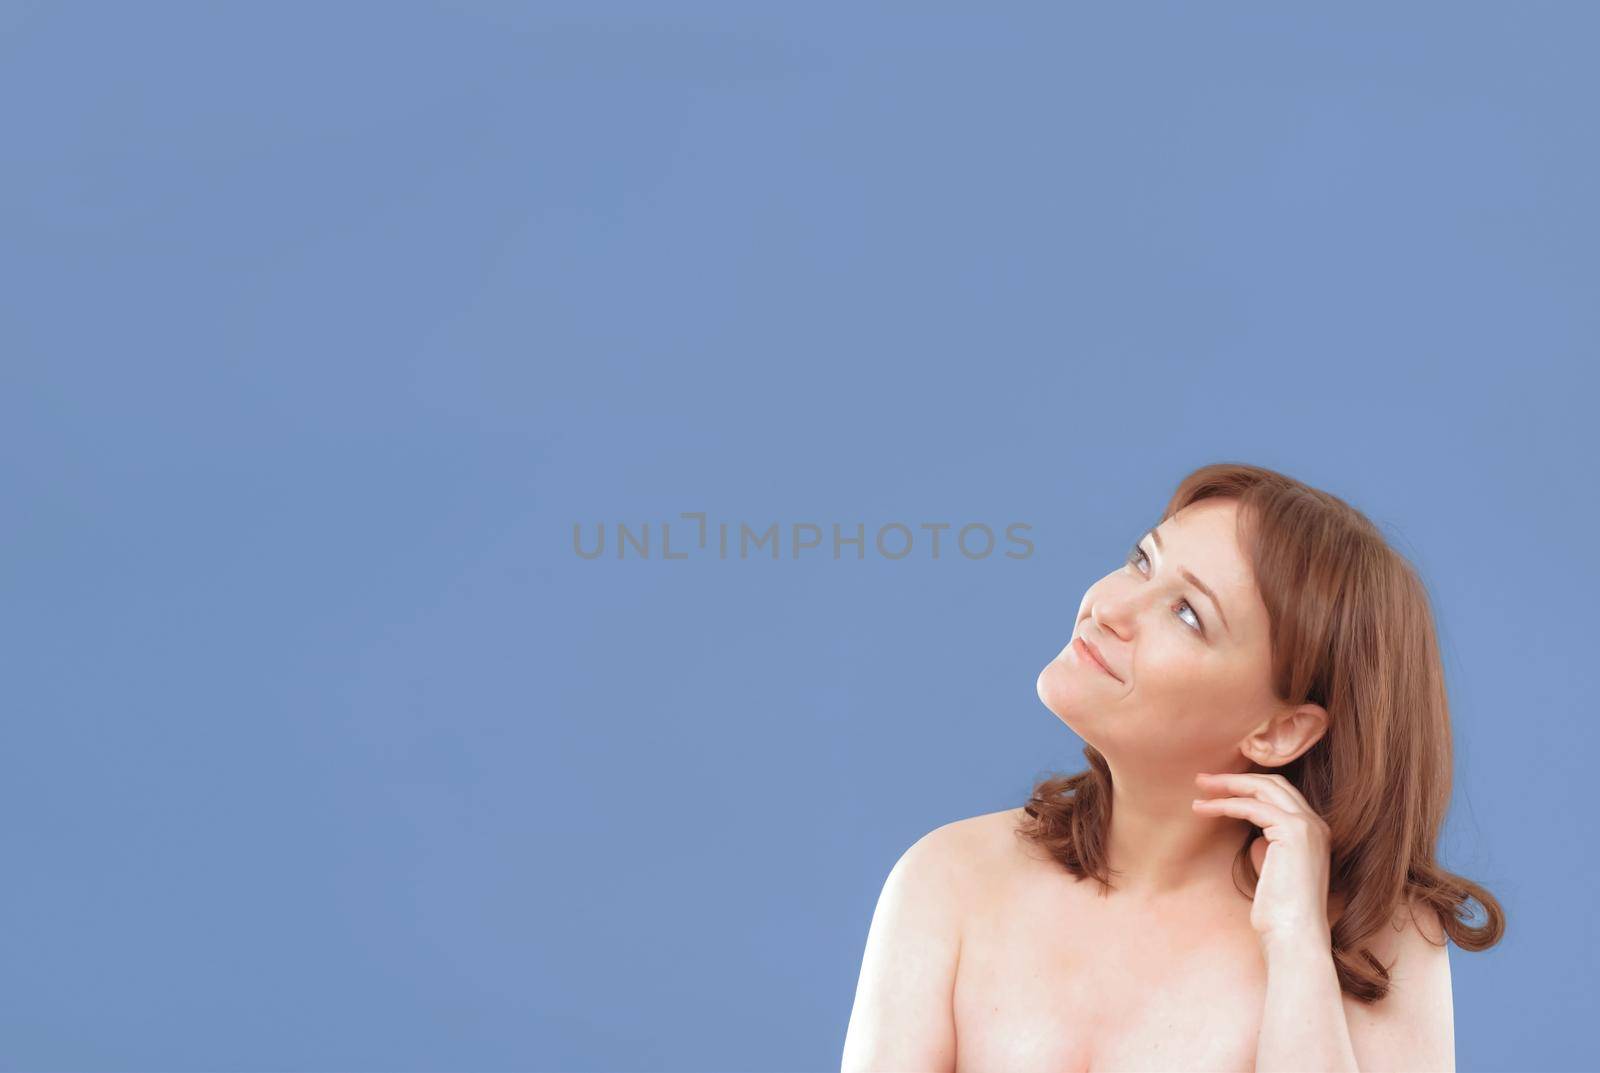 Naked woman applying anti-age cream on her skin isolated on color background. Pretty mature female applies skin care product by touching face with hand. Close up. Spa and wellness concept. Template.